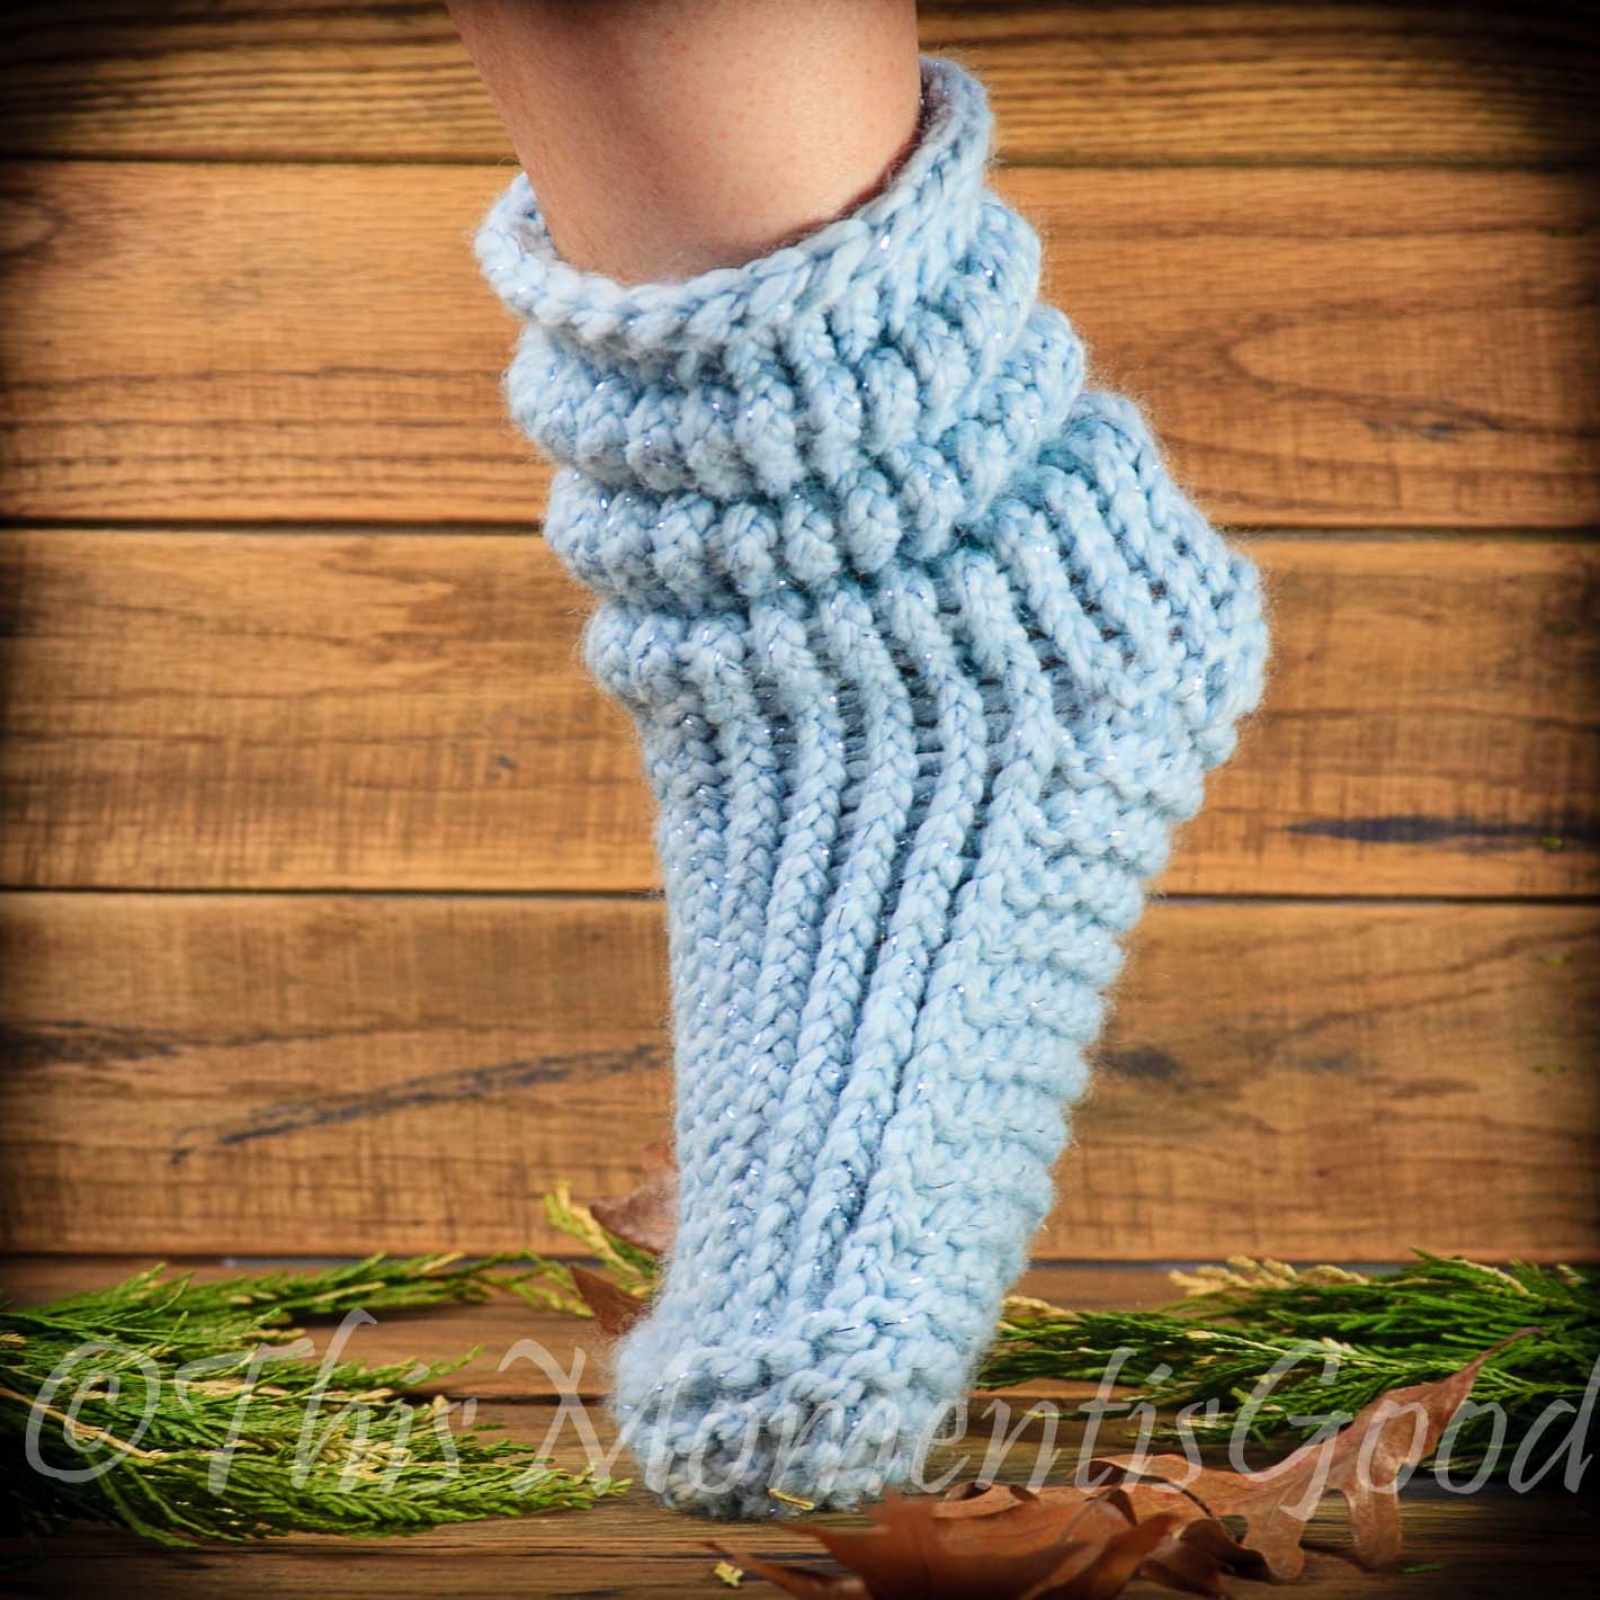 LOOM KNIT SLIPPER BOOTS PATTERN. THE BUNCHY BOOT PATTERN